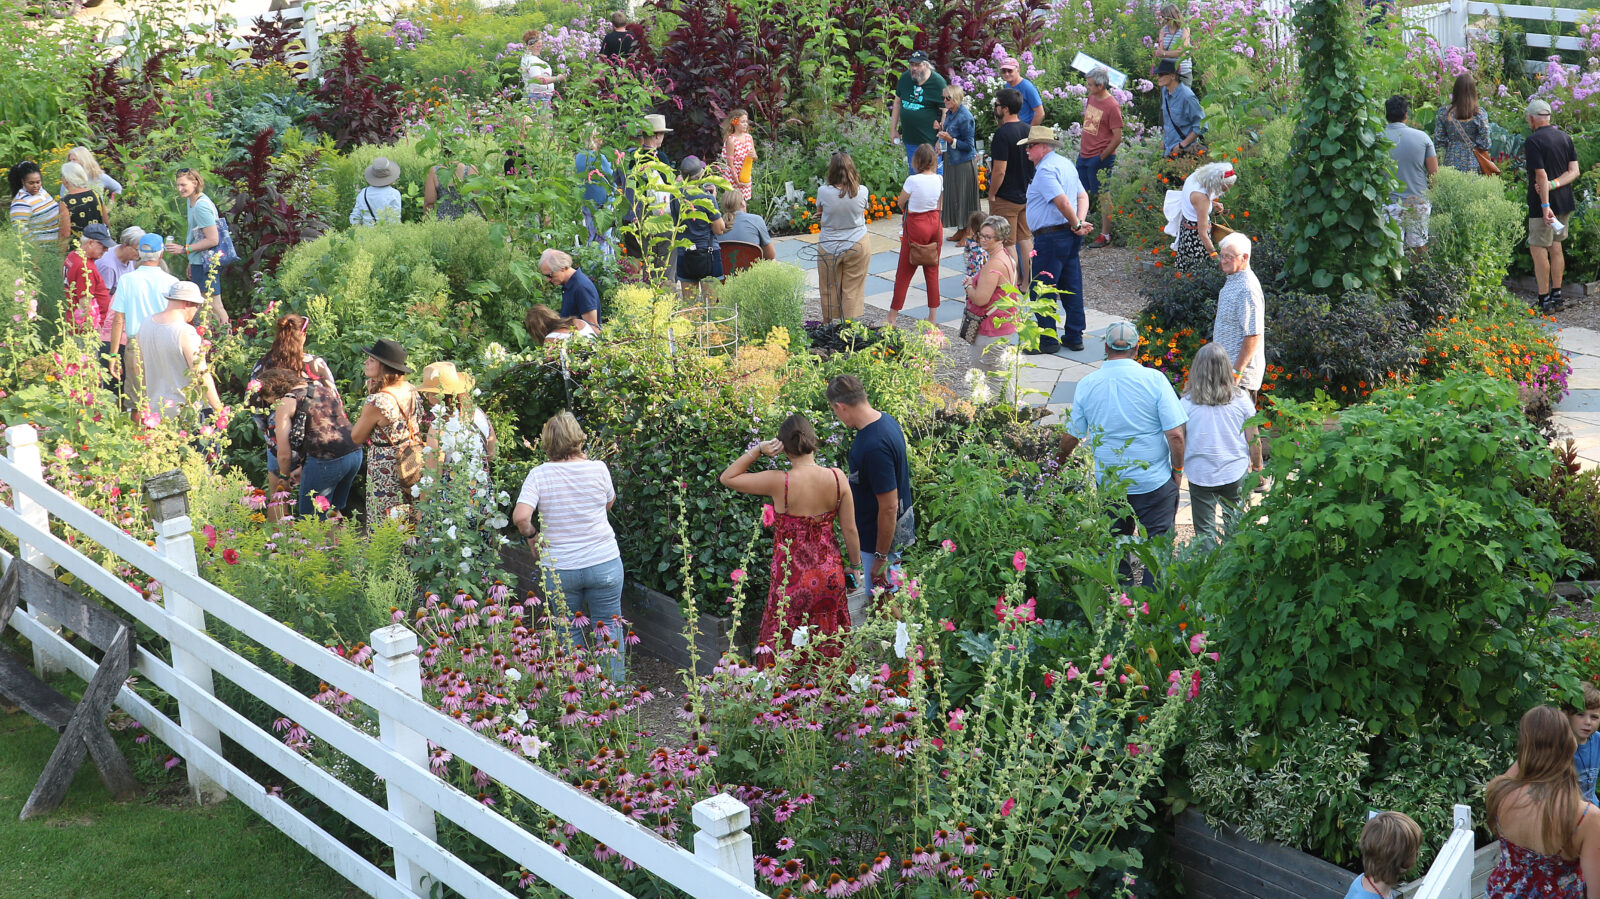 A group of people in a garden.